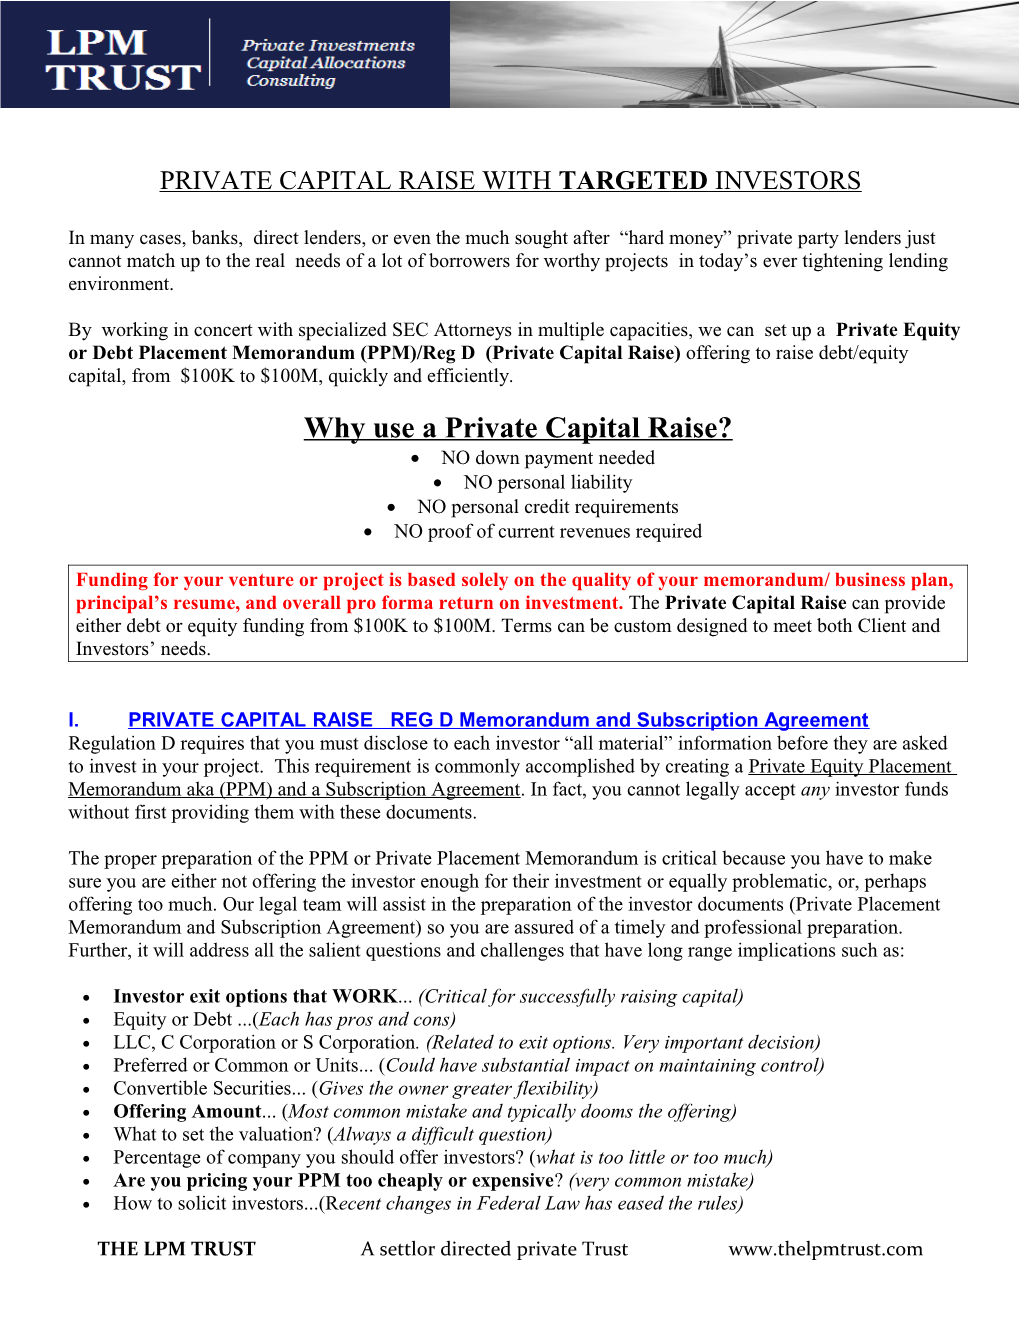 Private Capital Raise with Targeted Investors